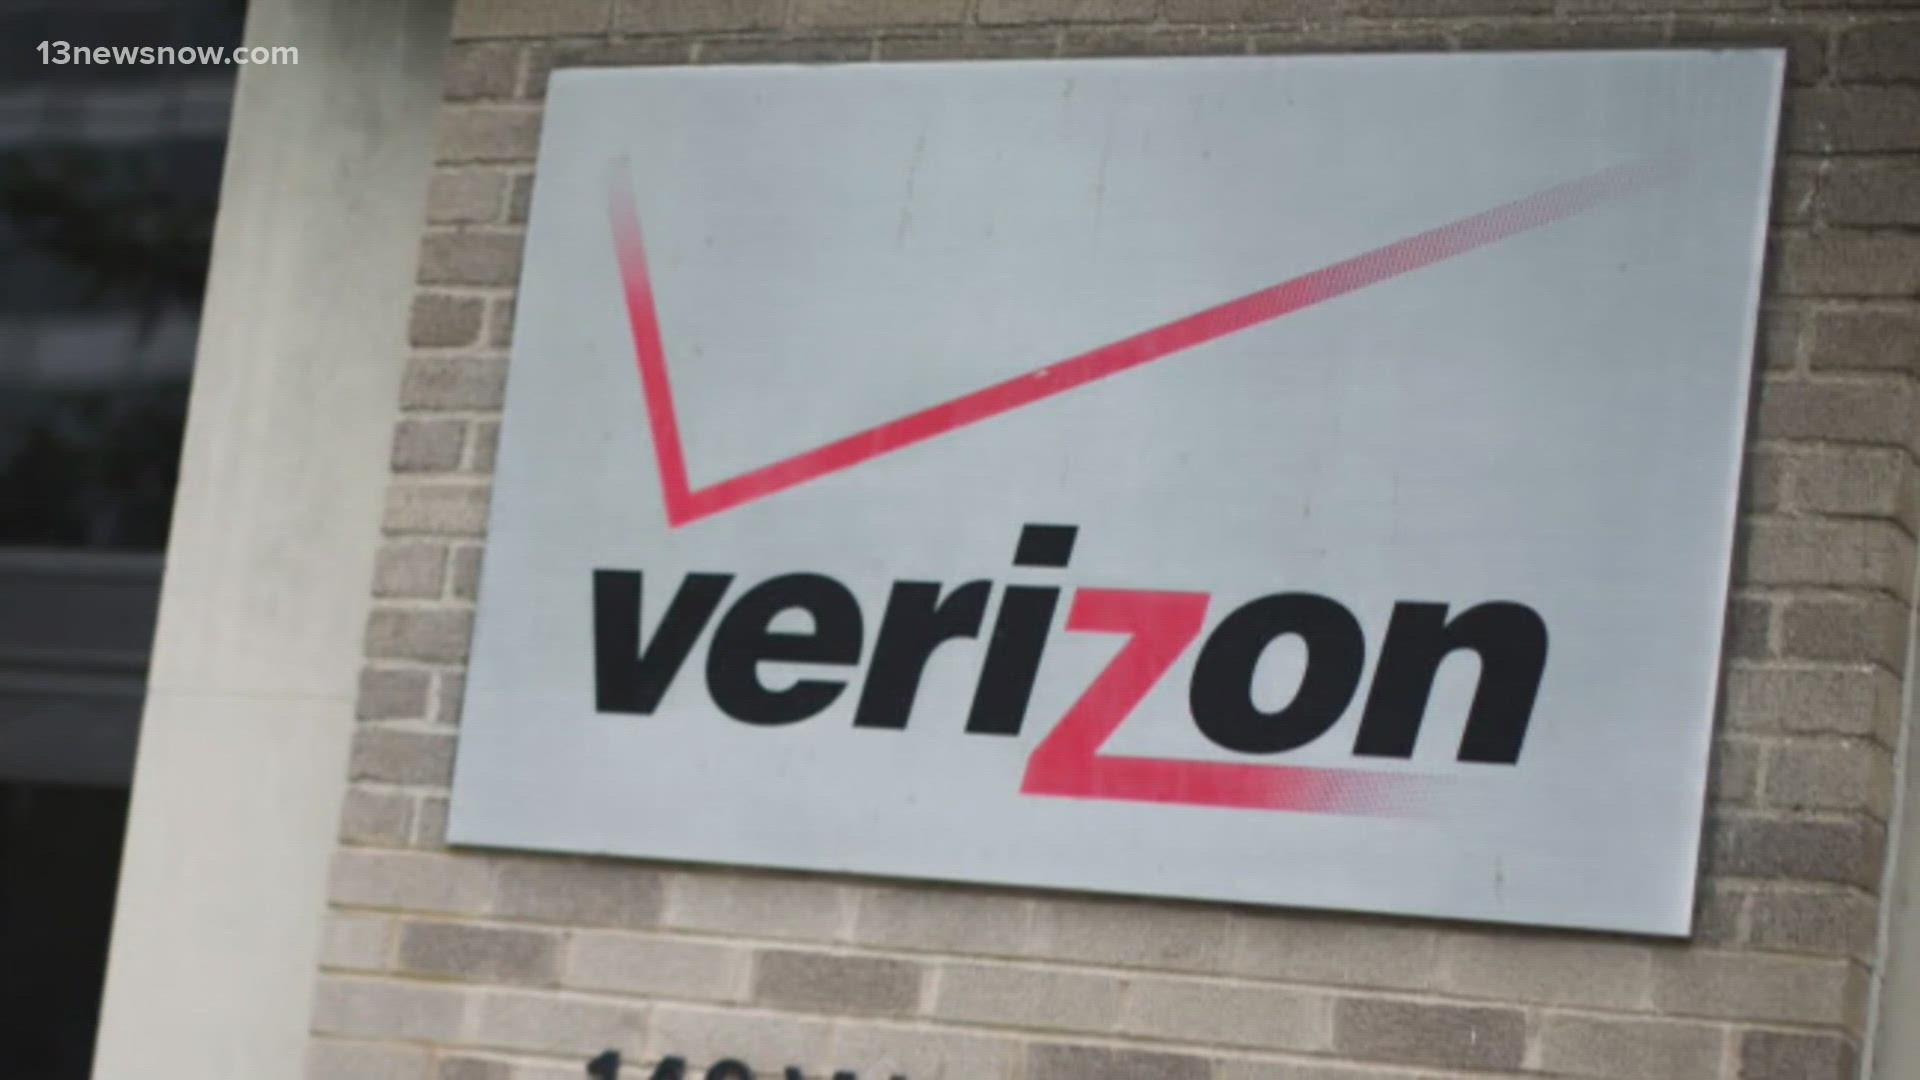 Verizon Tv Problems Phone Number - Spectrum outages reported in the last 24  hours.